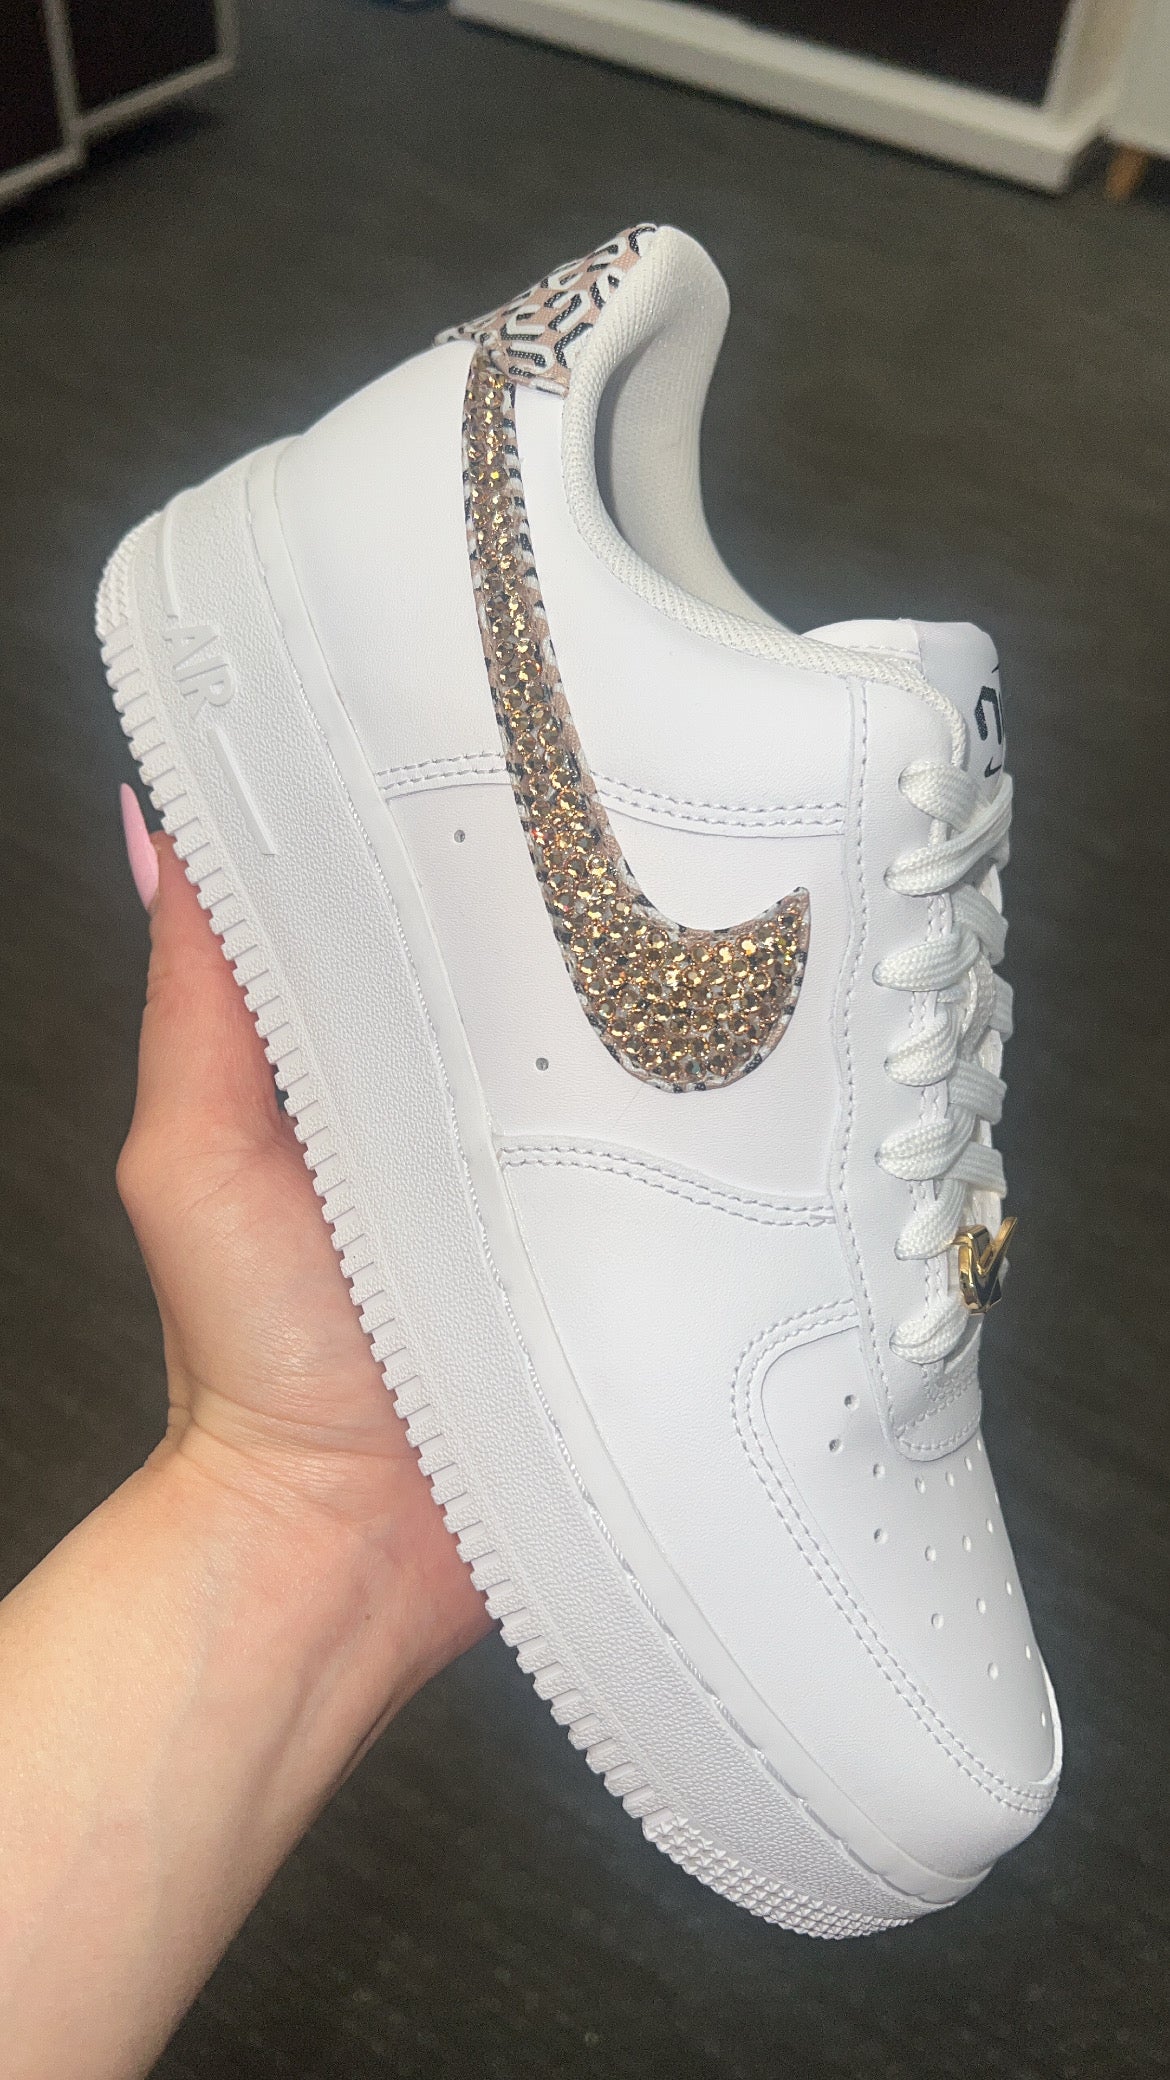 United Nike Air Force 1 with Swarovski Crystals